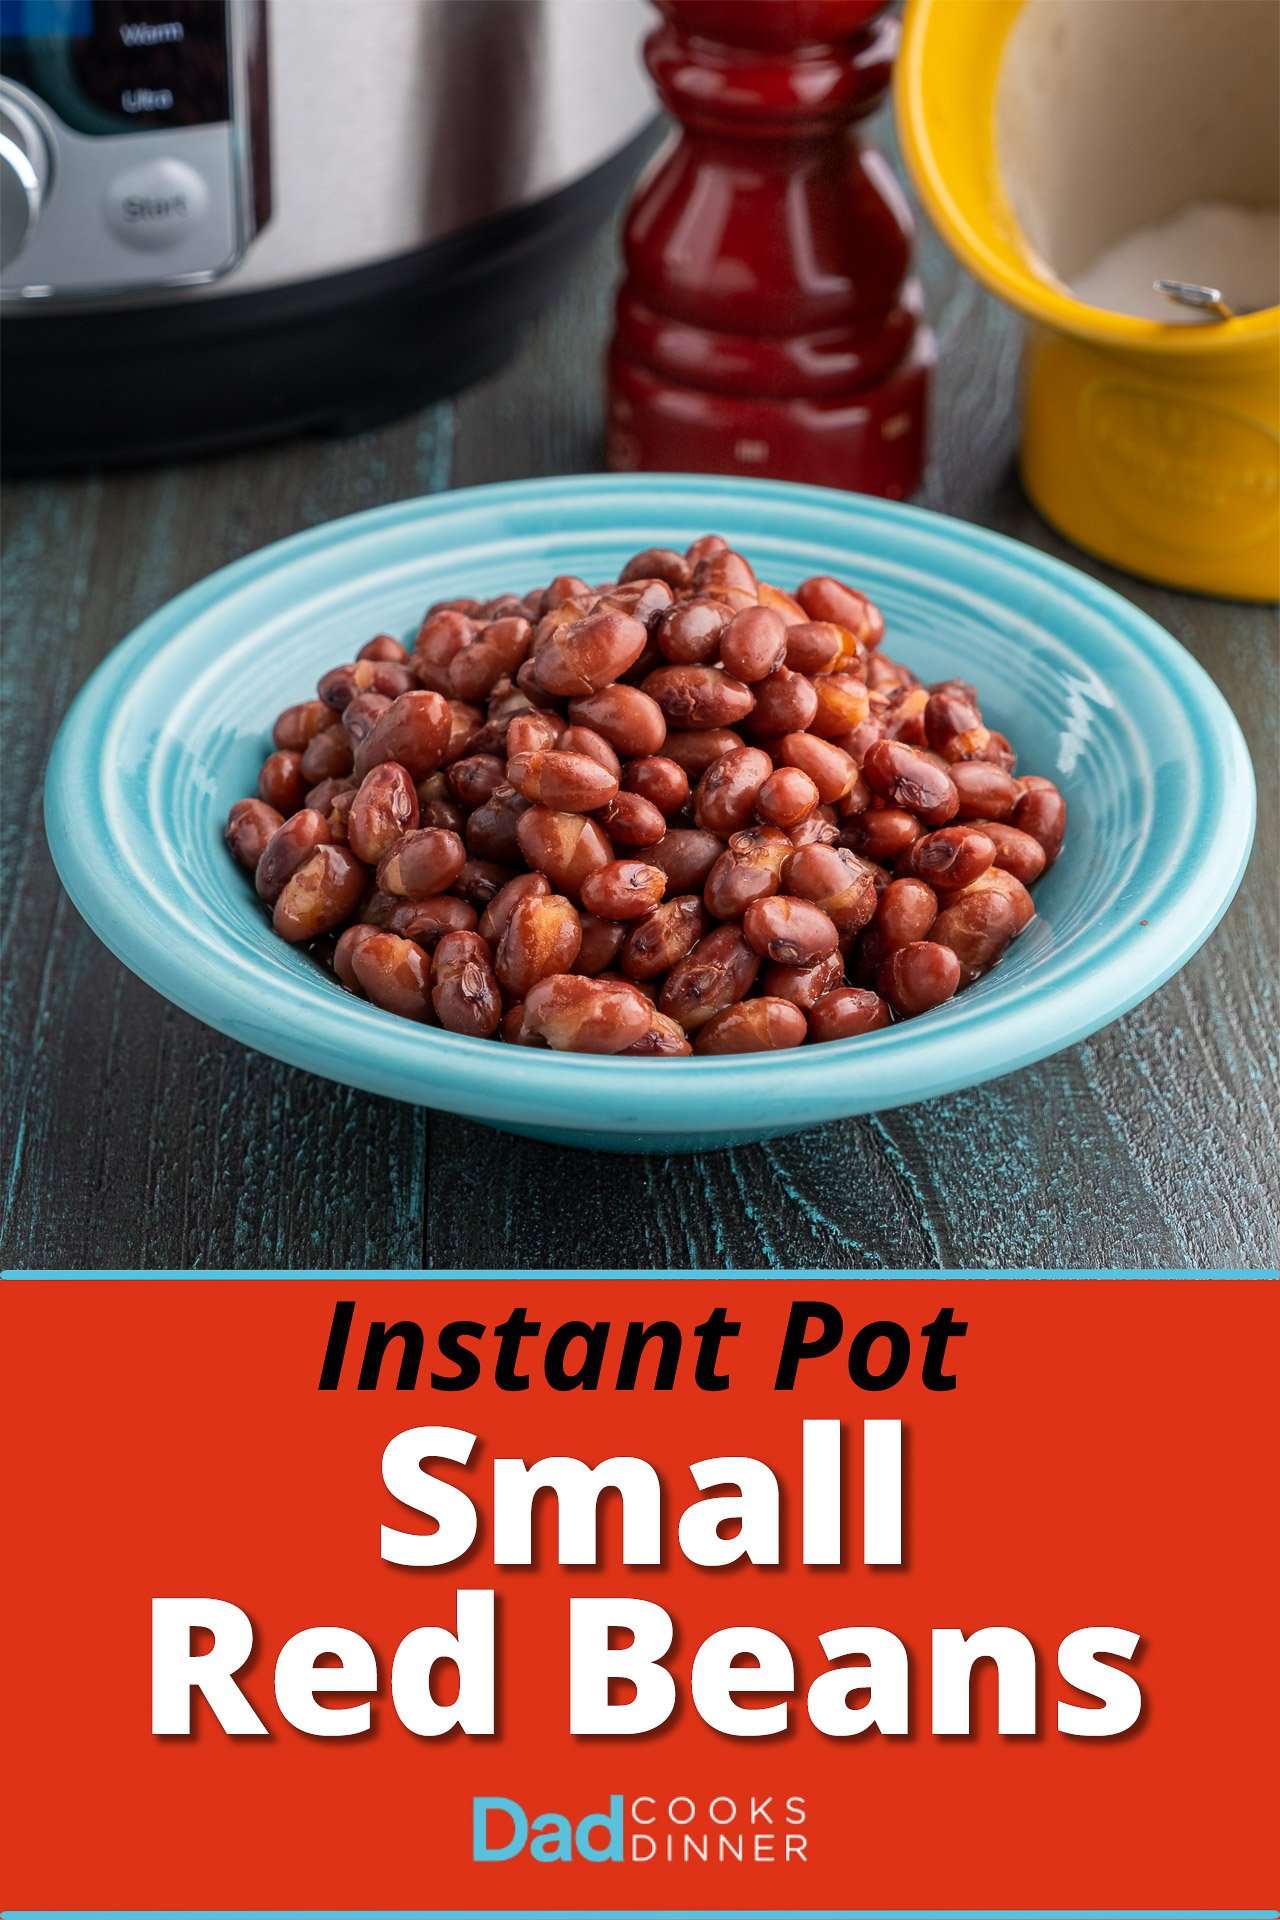 Instant Pot Small Red Beans (Domingo Rojo Beans ...